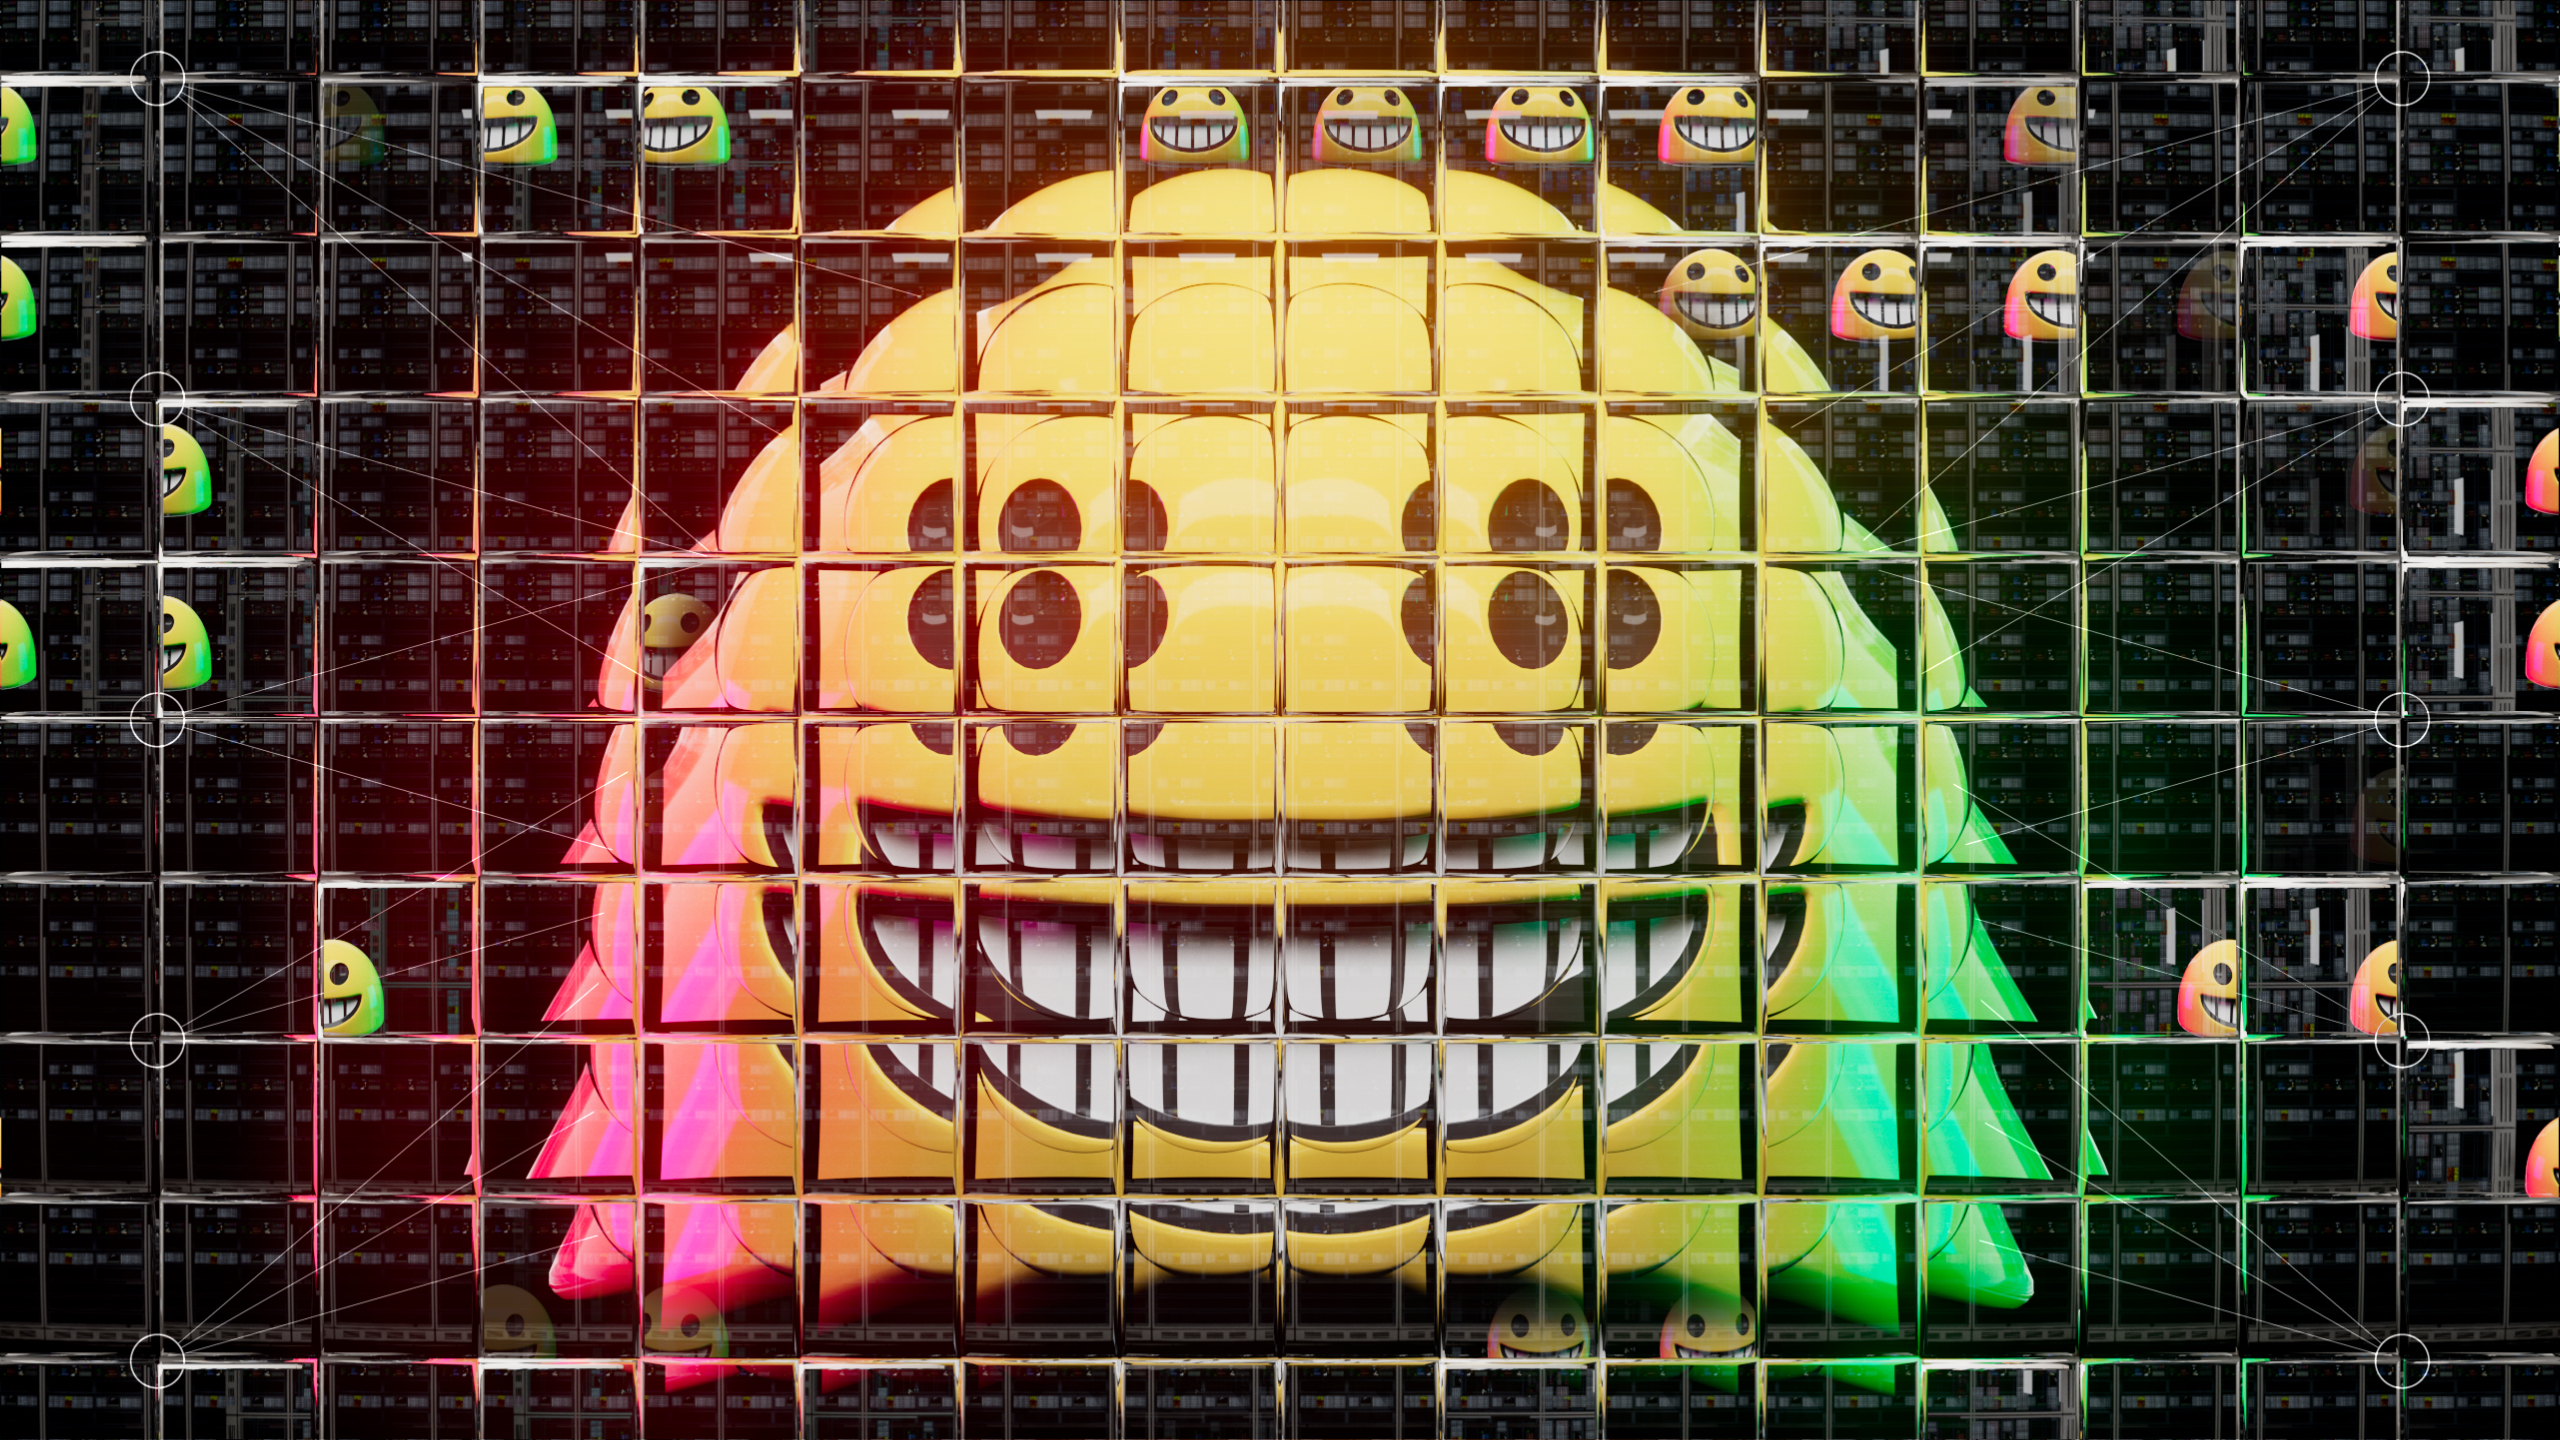 A photographic rendering of a smiling face emoji seen through a refractive glass grid, overlaid with a diagram of a neural network. (Image by Alan Warburton / © BBC / Better Images of AI / Social Media / CC-BY 4.0)